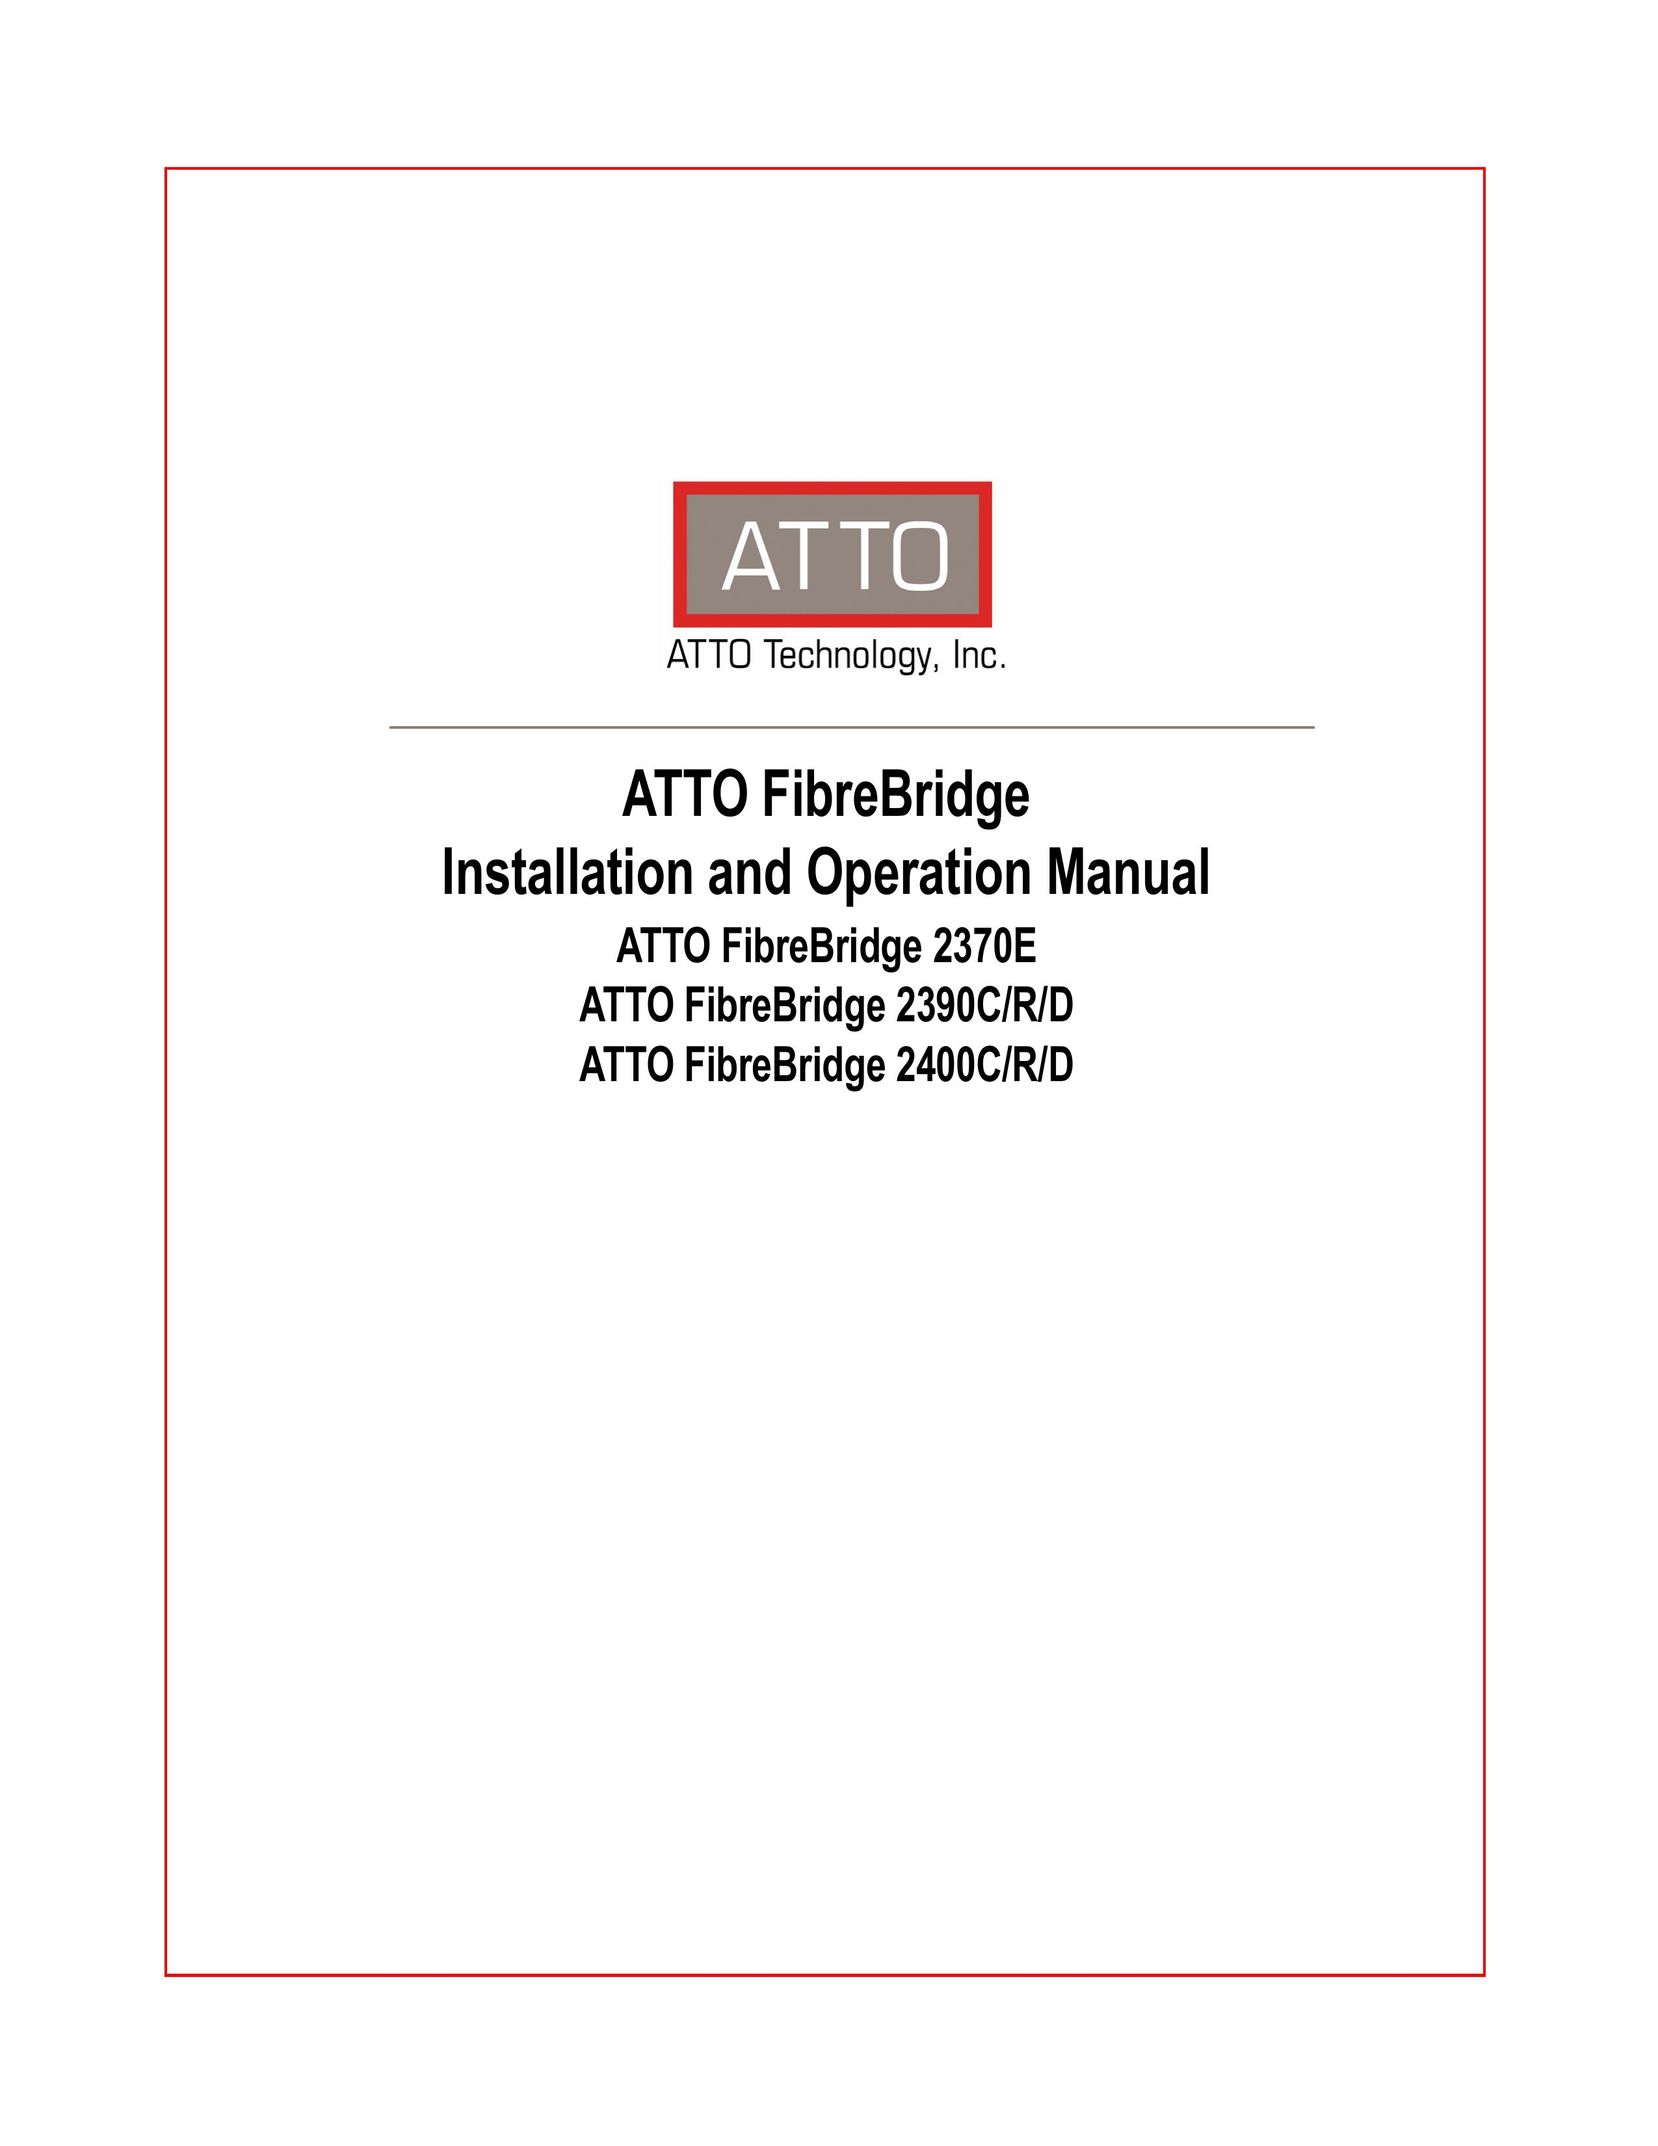 ATTO Technology 2390C/R/D Network Router User Manual